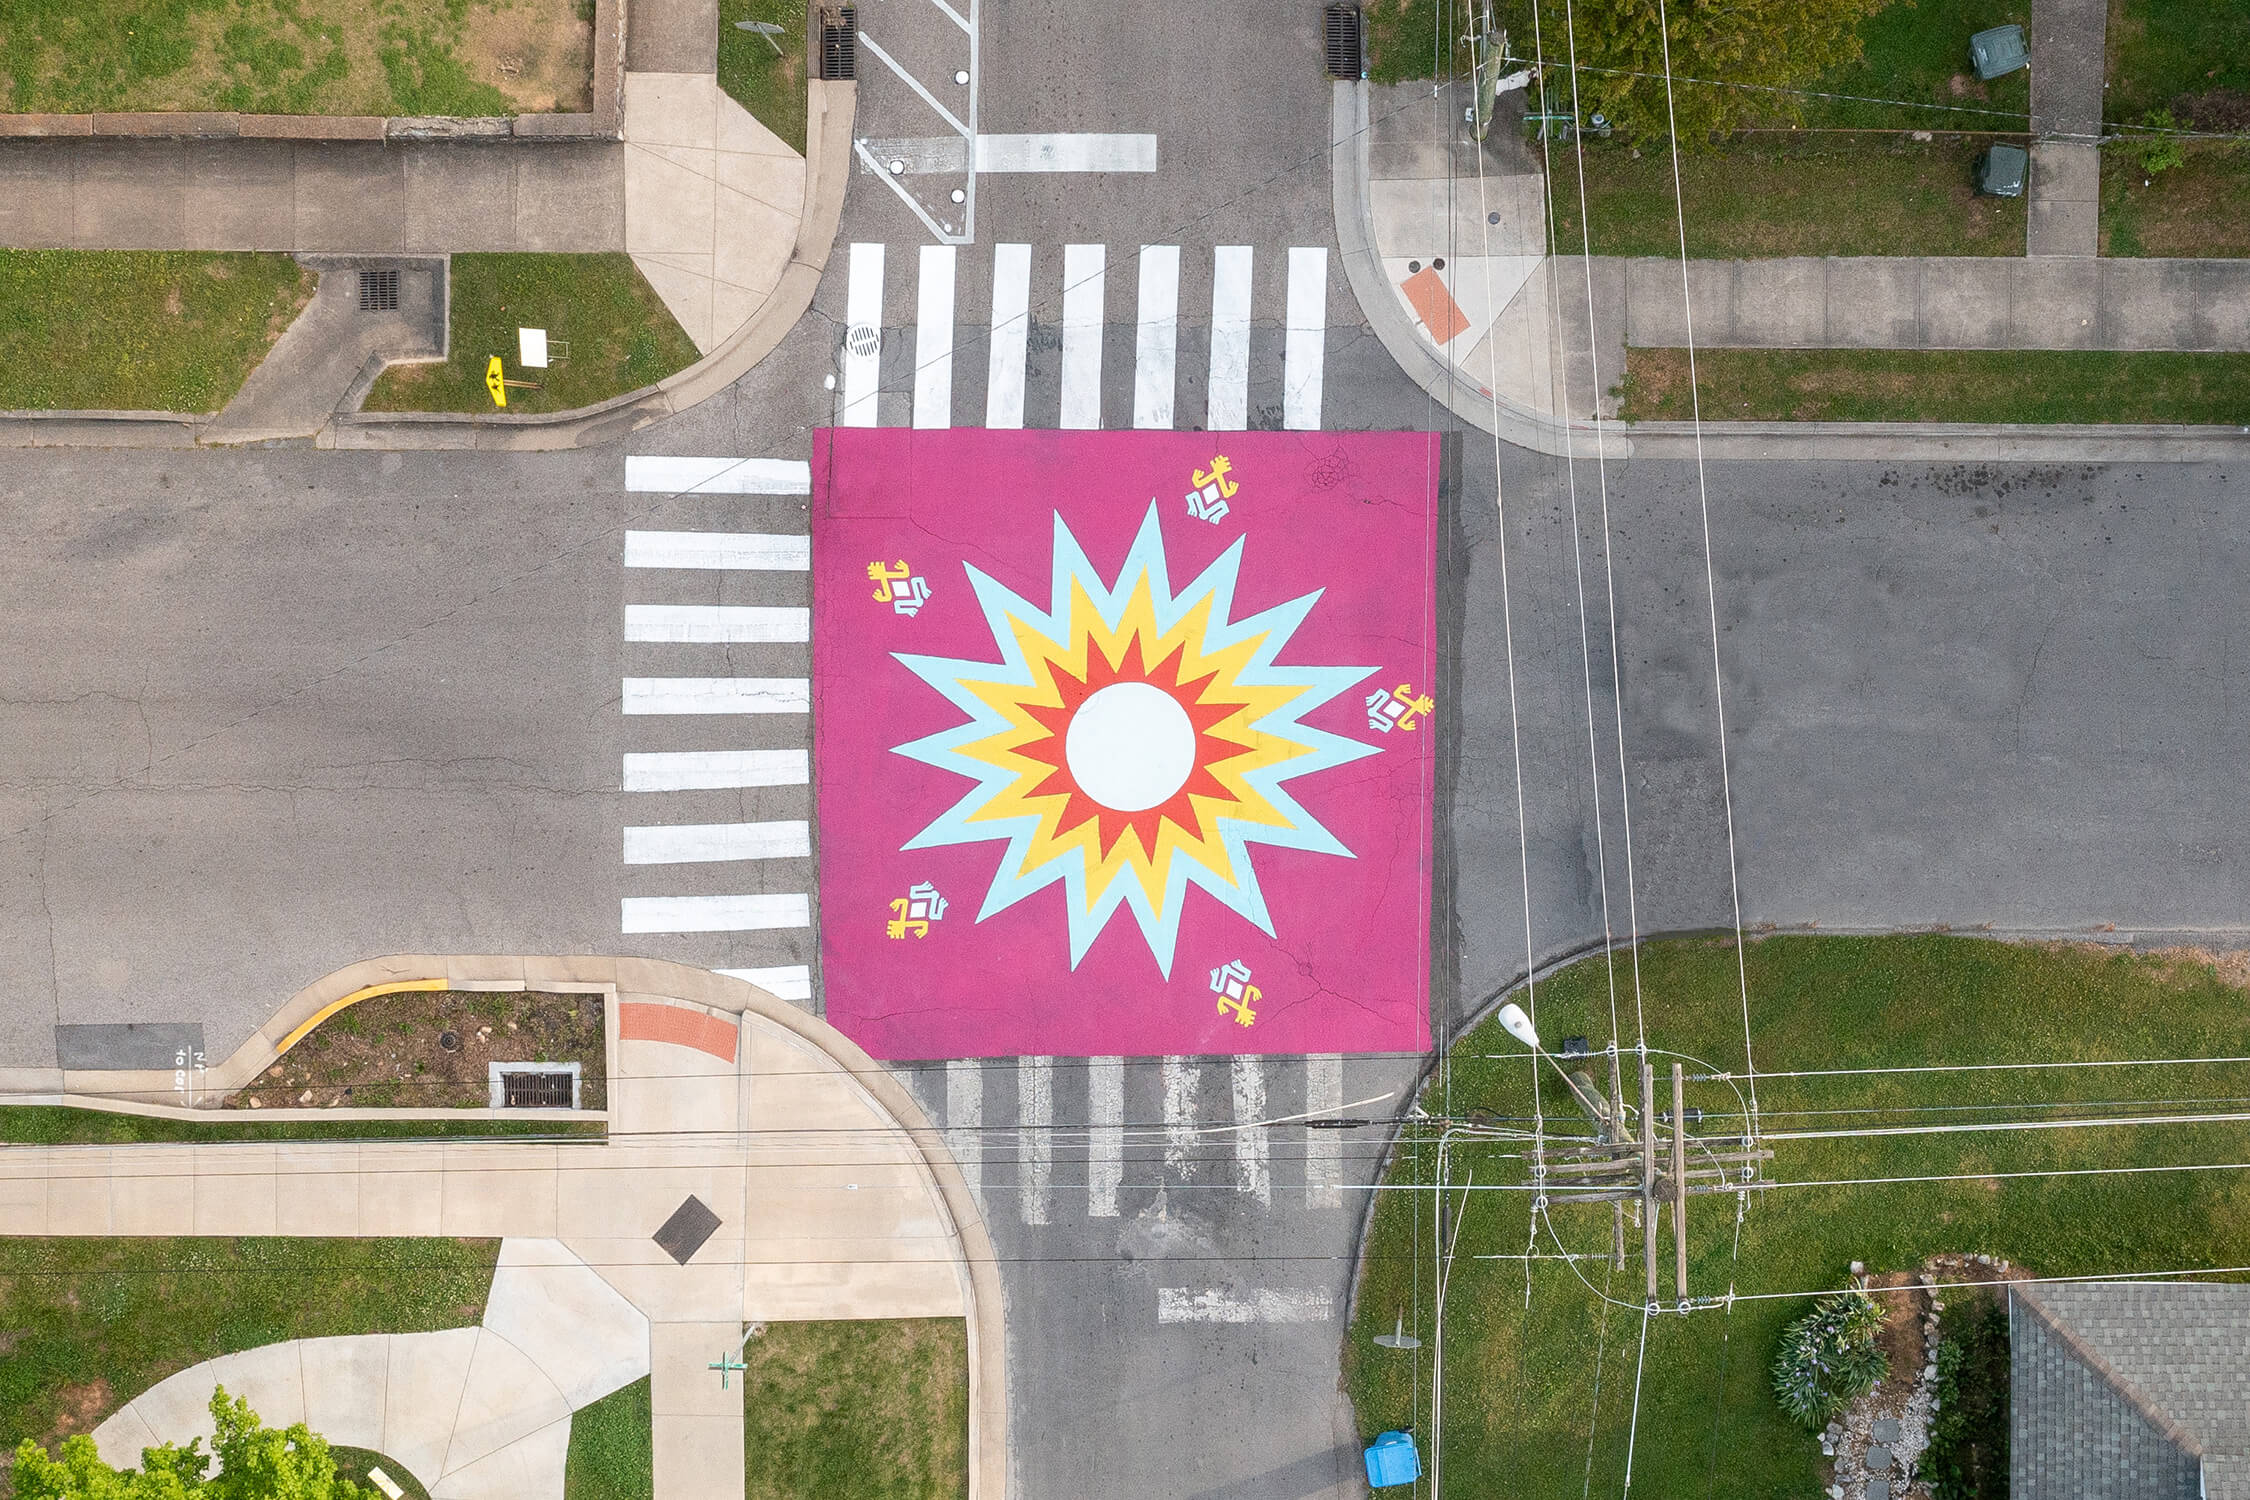 A street mural seen from above shows a bright pink square with a starburst in the center and frog designs around the edges.